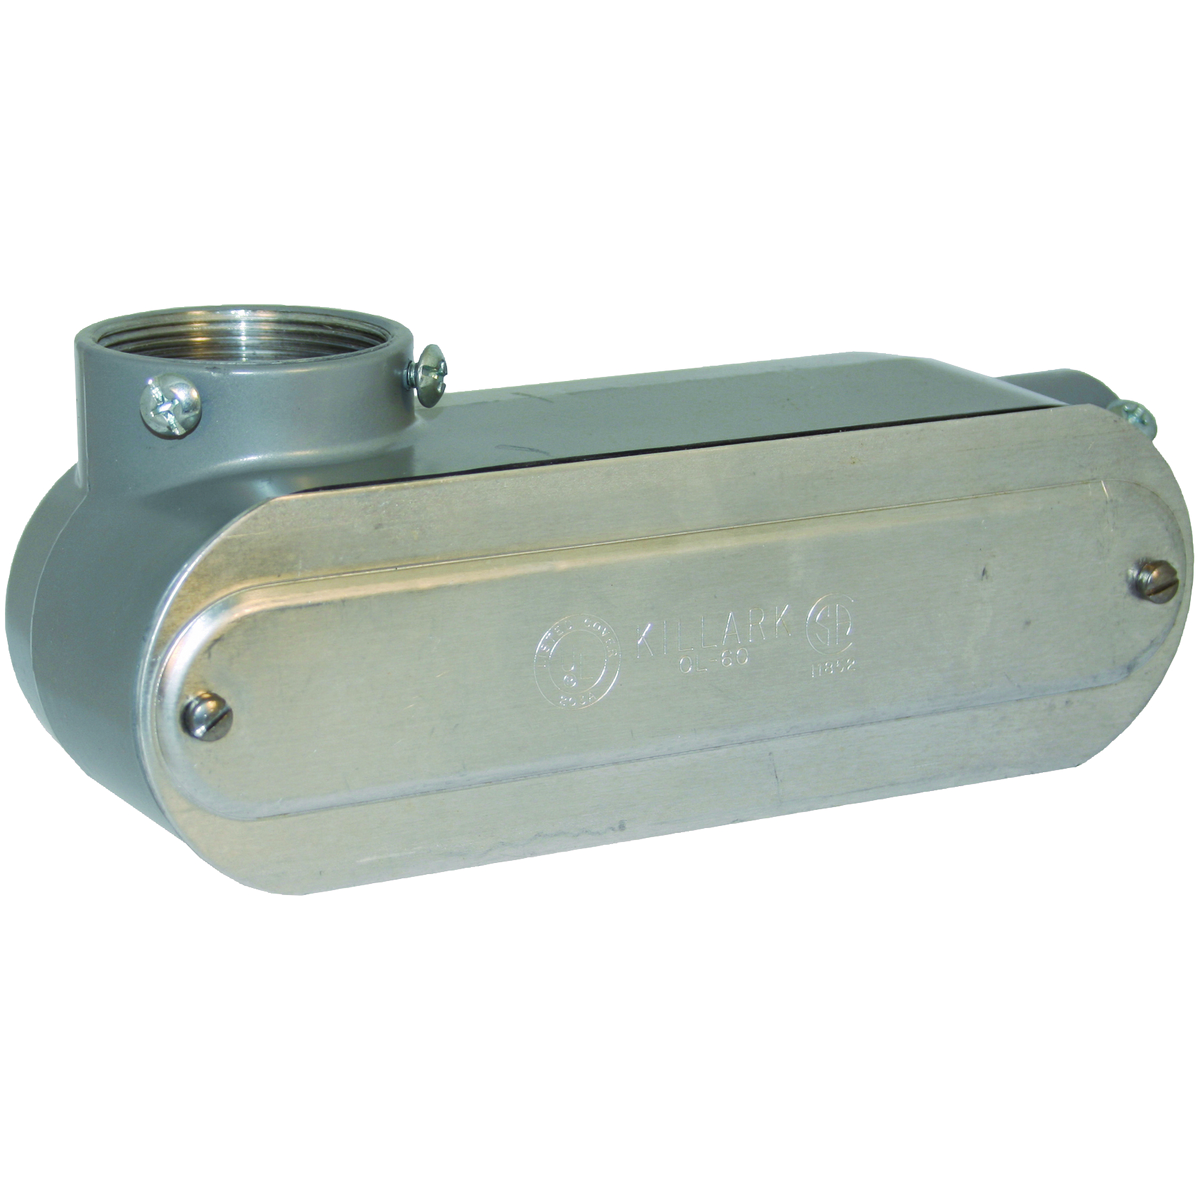 CO SERIES - ALUMINUM CONDUIT BODY WITH COVER AND GASKET - LL TYPE - HUBSIZE 2 INCH - VOLUME 70.0 CUBIC INCHES